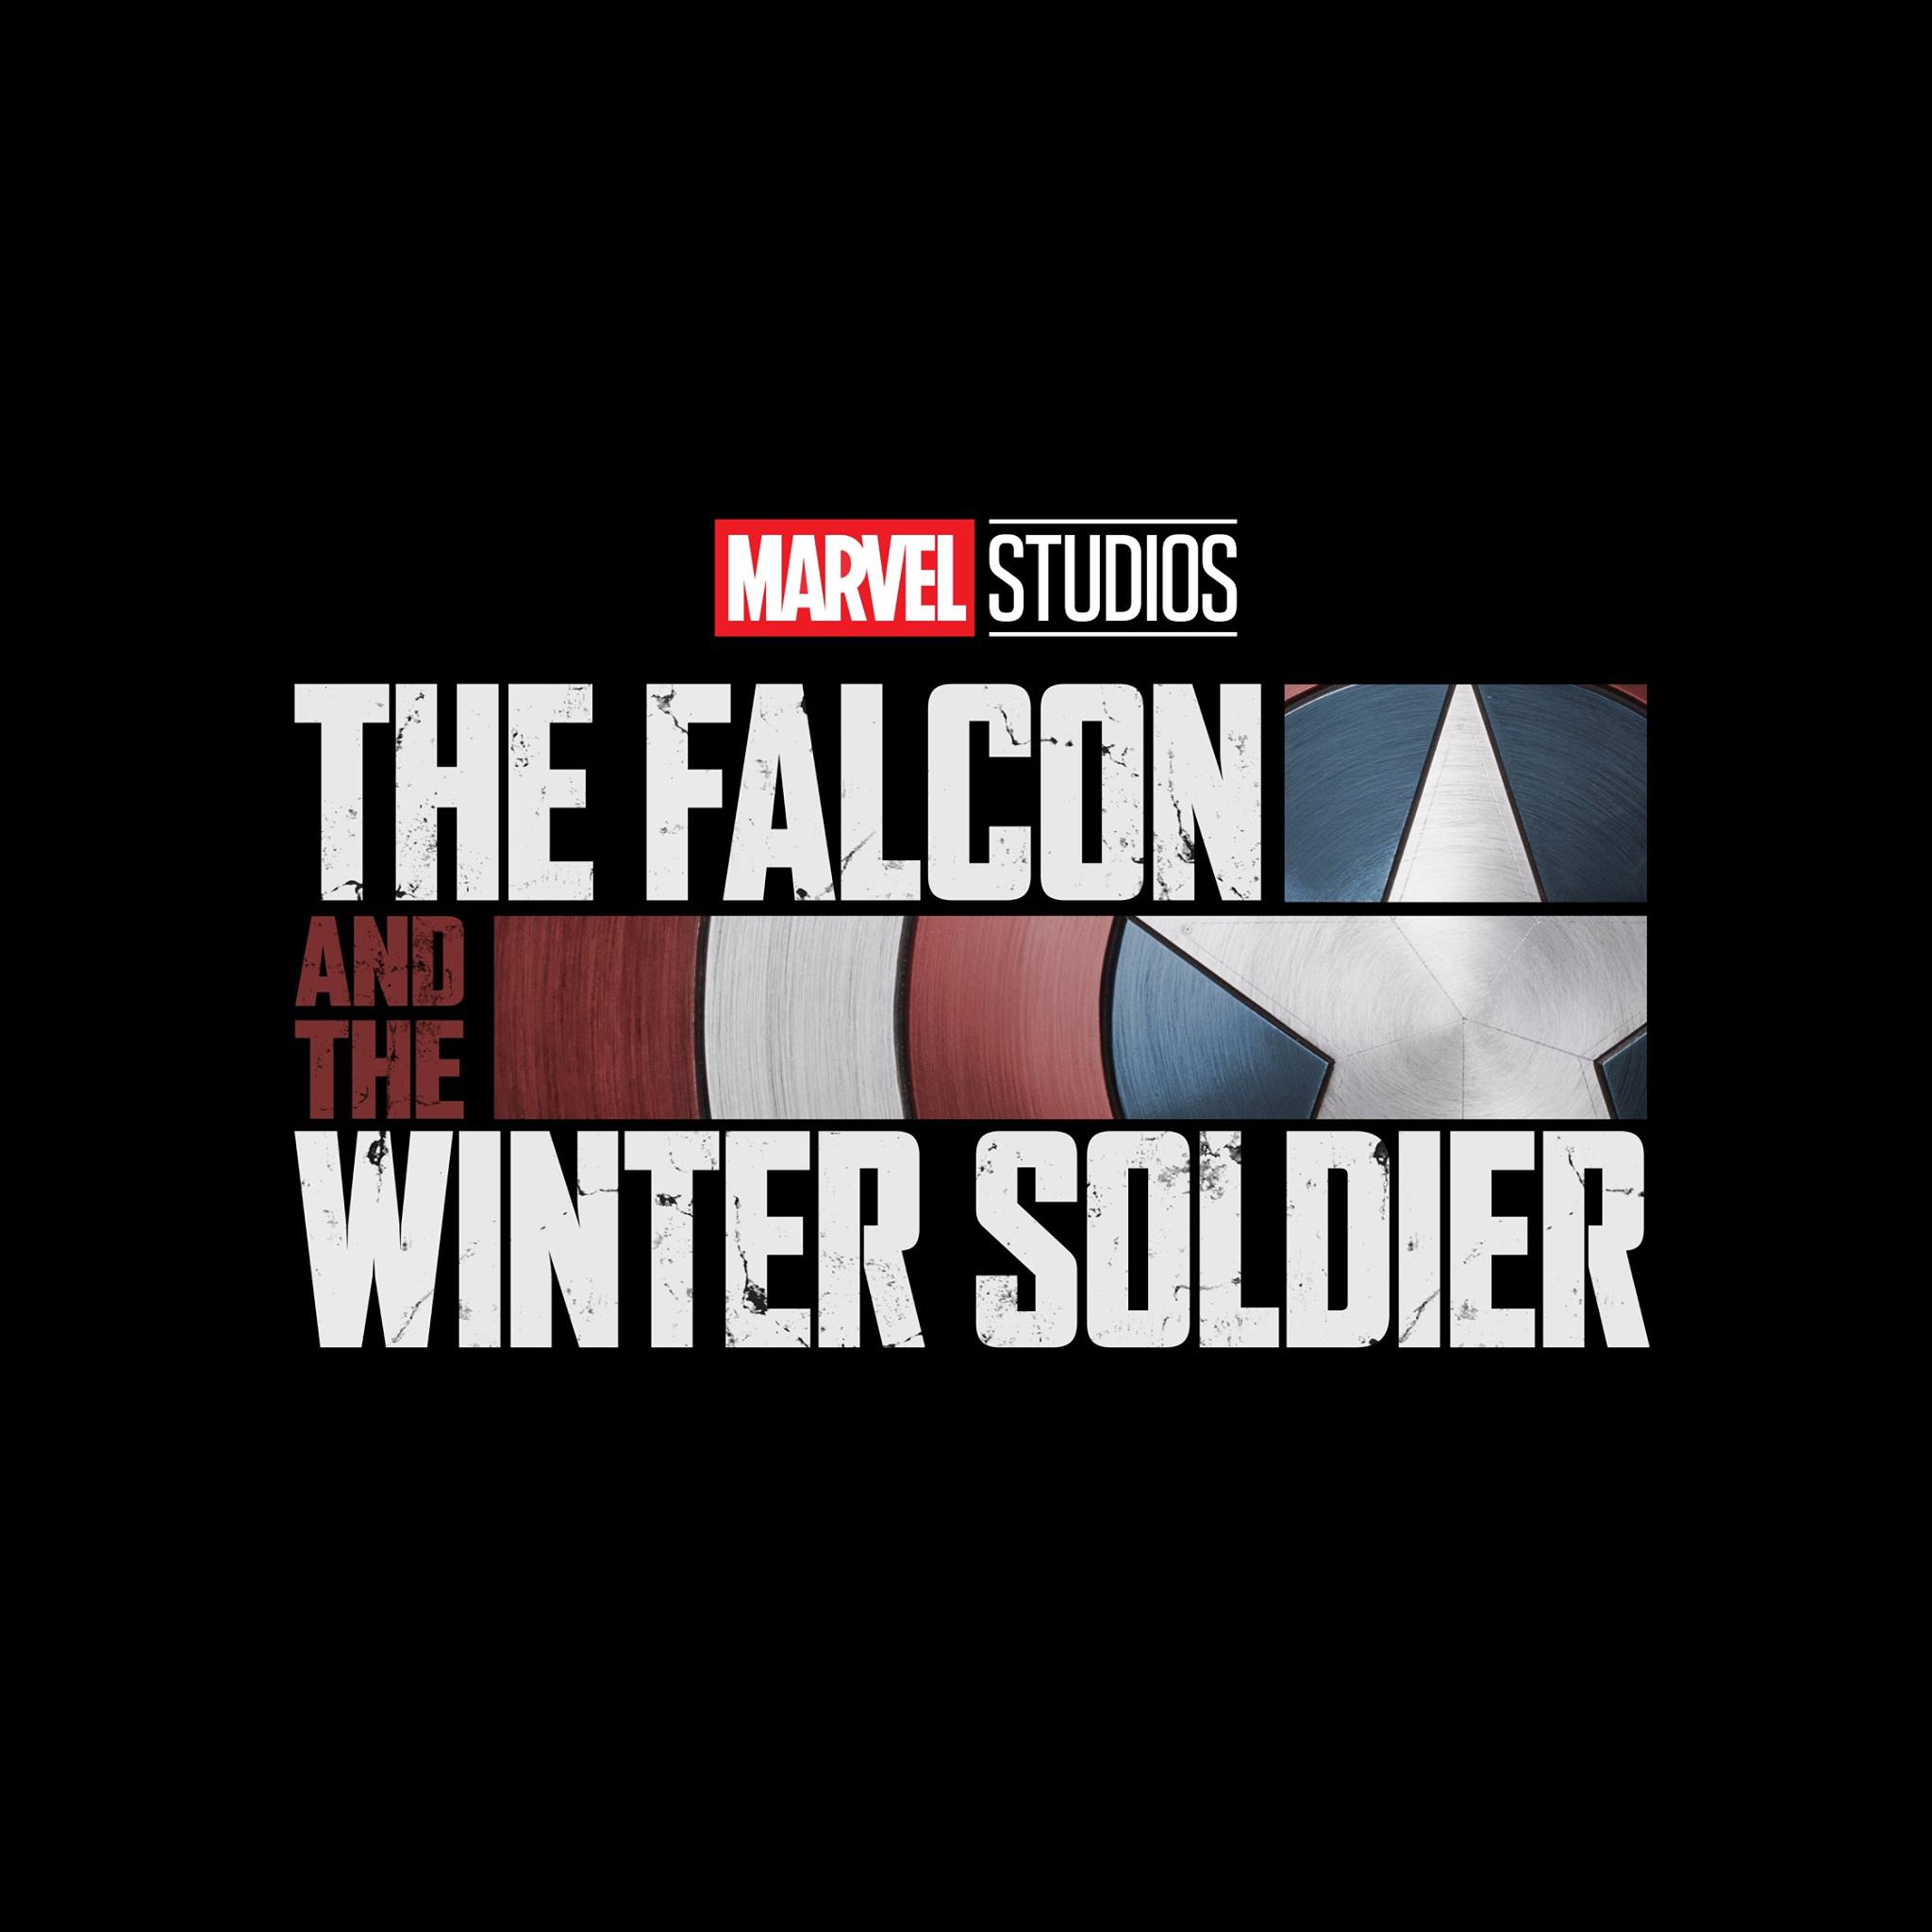 The Falcon and The Winter Soldier © Marvel Studios